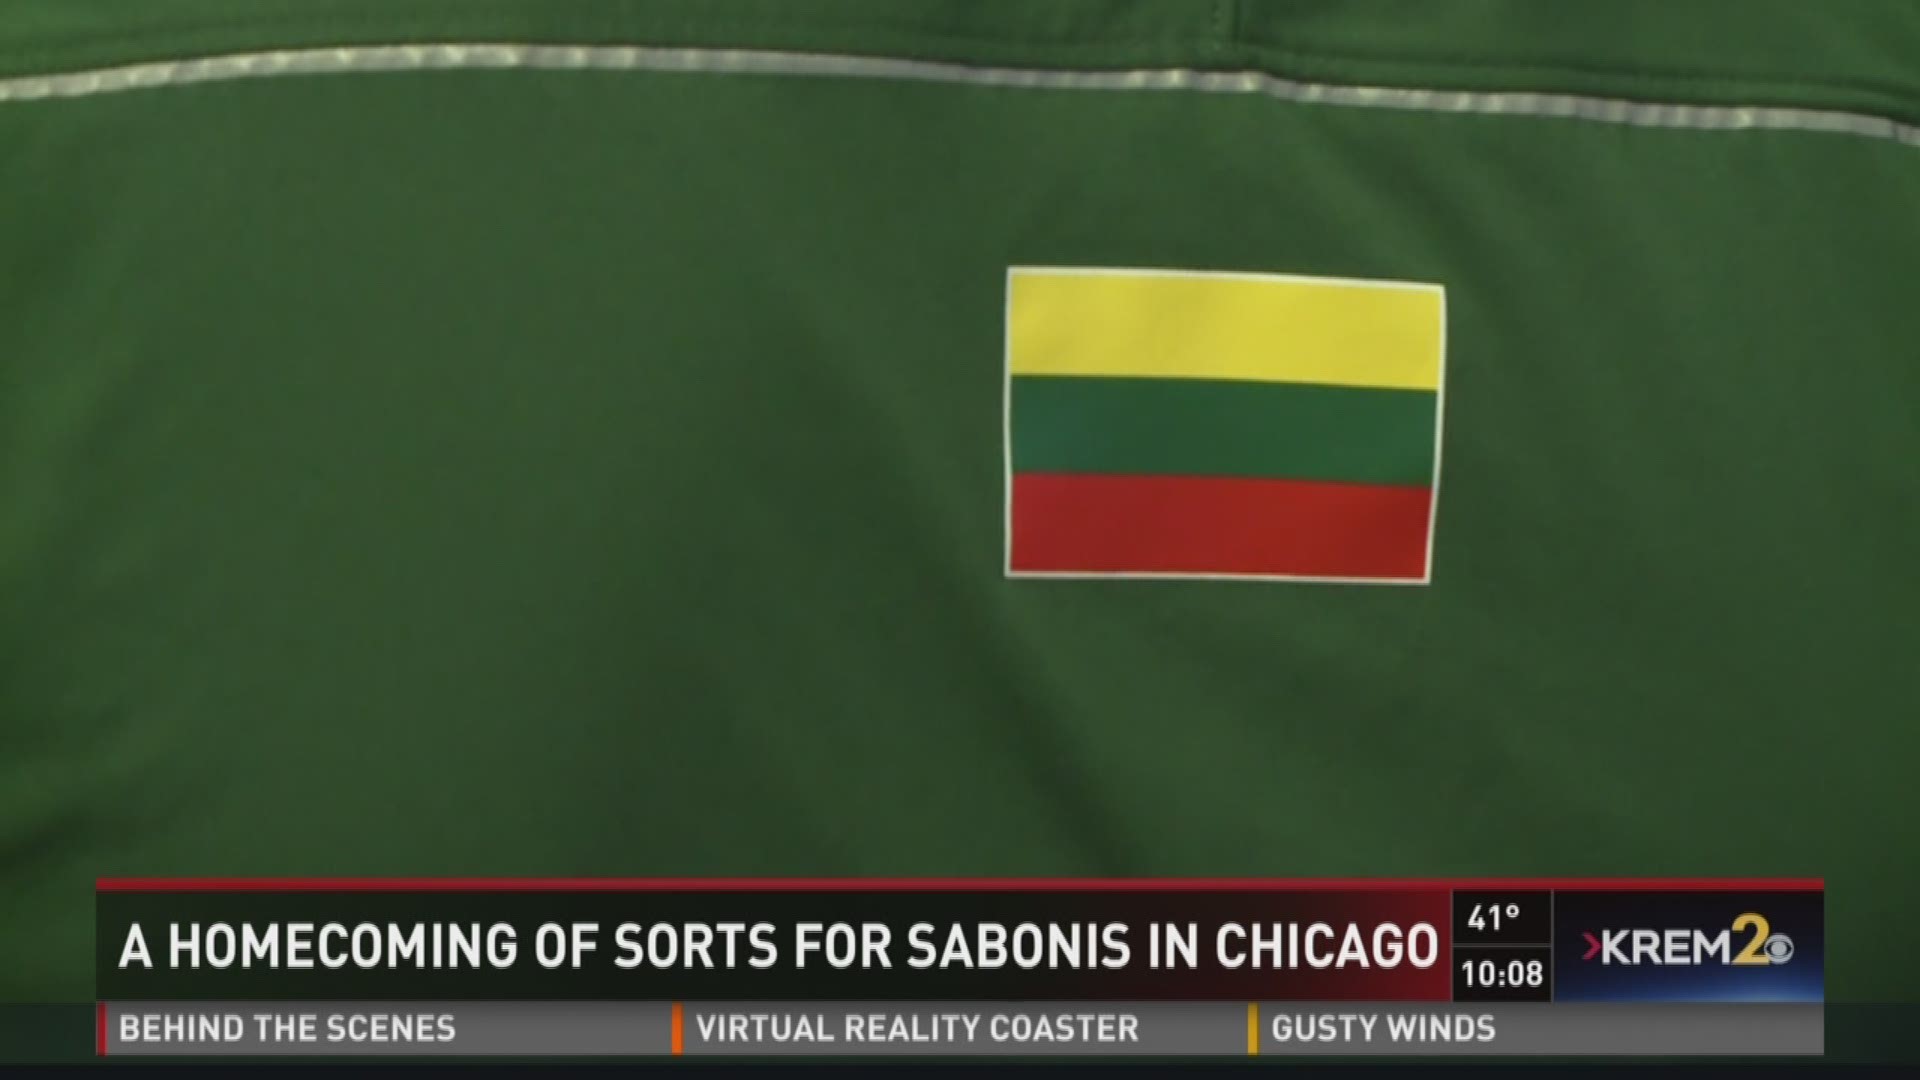 Gonzaga fans are known for traveling well, but the Bulldogs will have some extra support in Chicago thanks to Domas Sabonis and his Lithuanian roots.